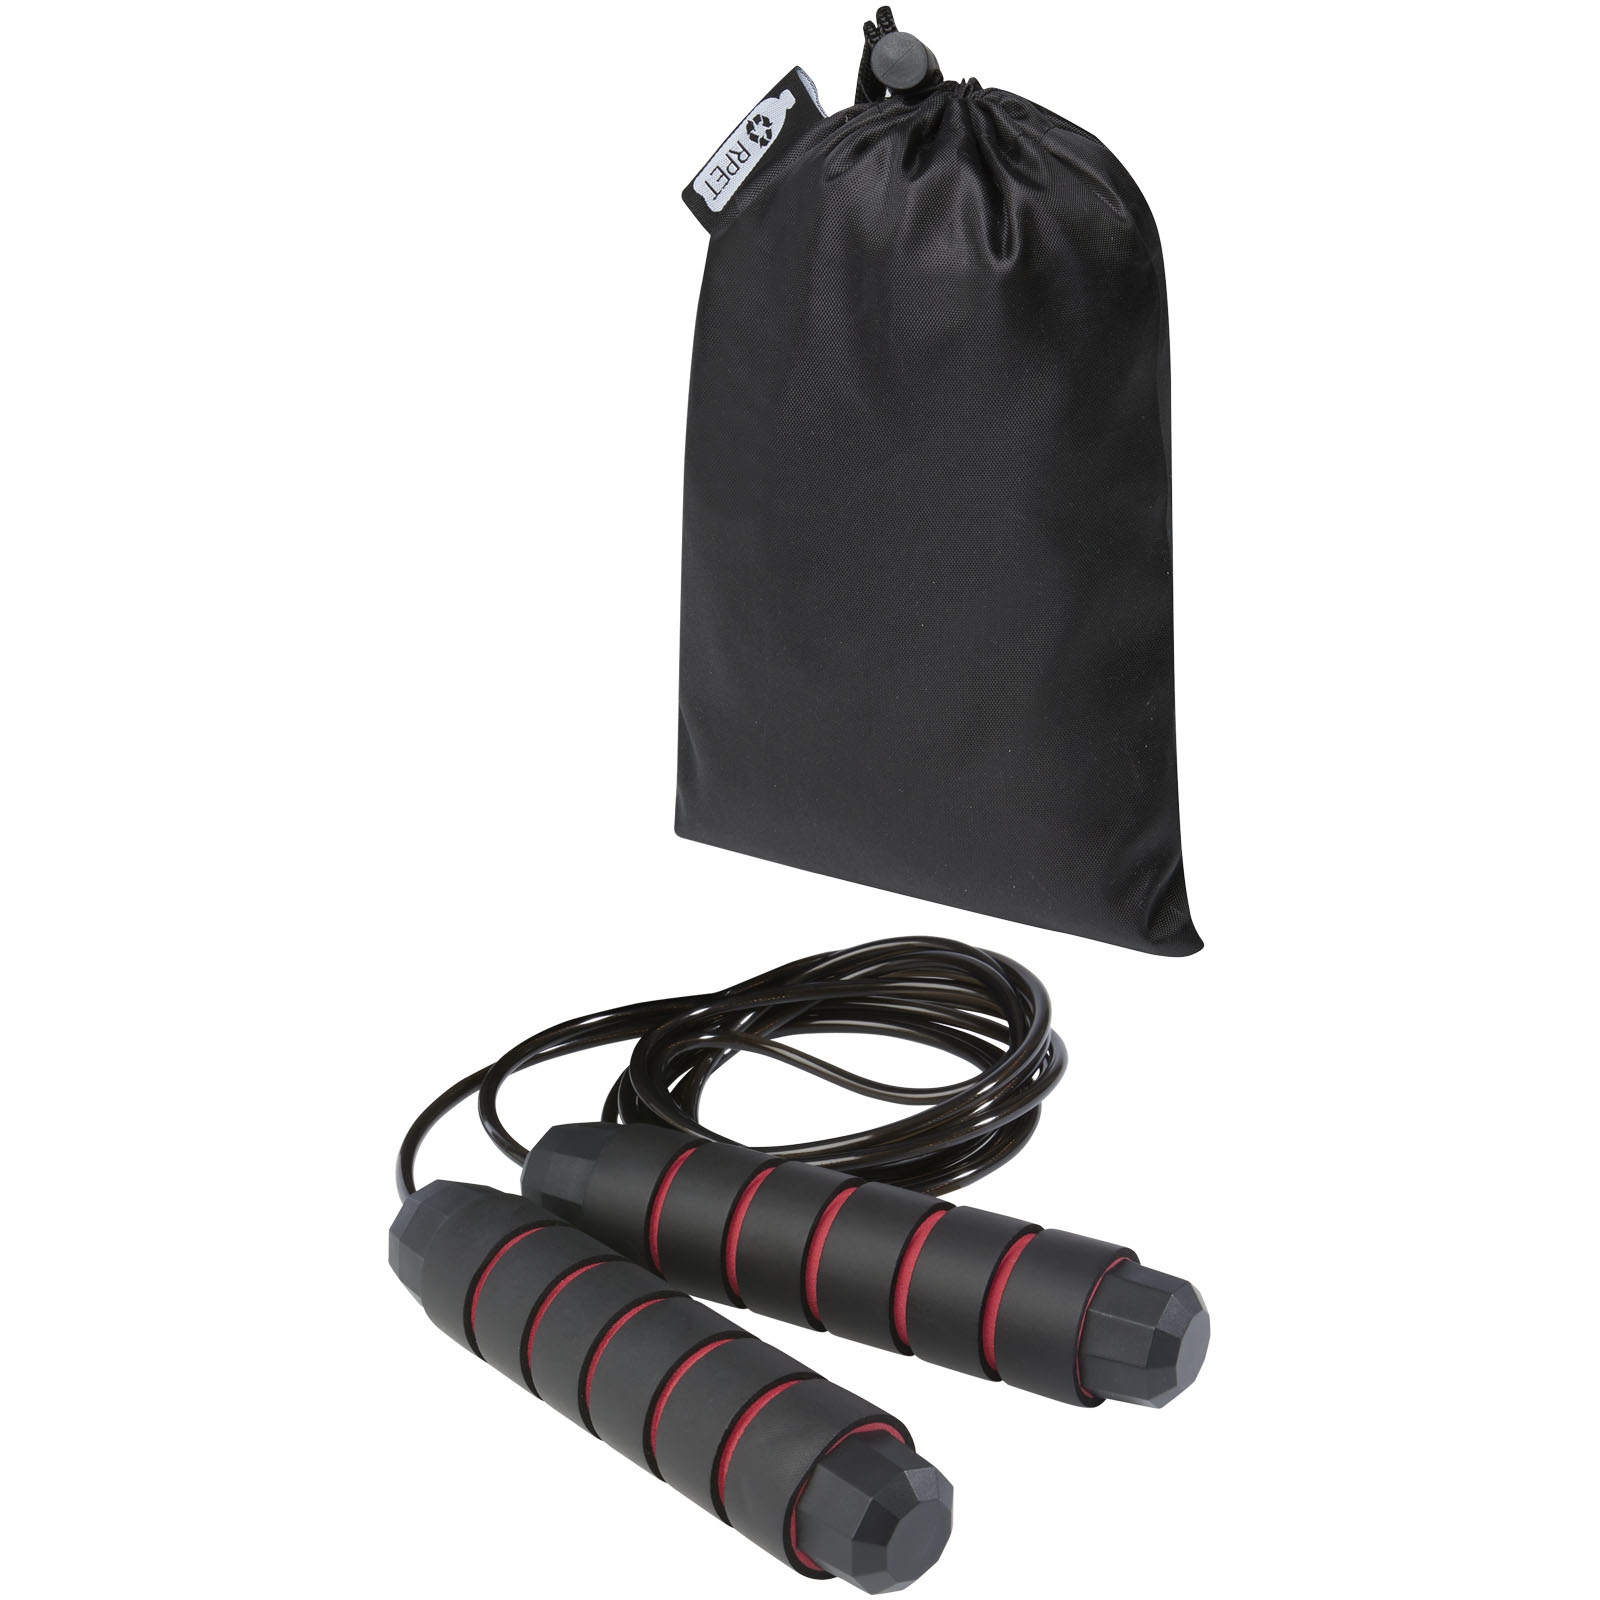 Fitness & Sport - Austin soft skipping rope in recycled PET pouch